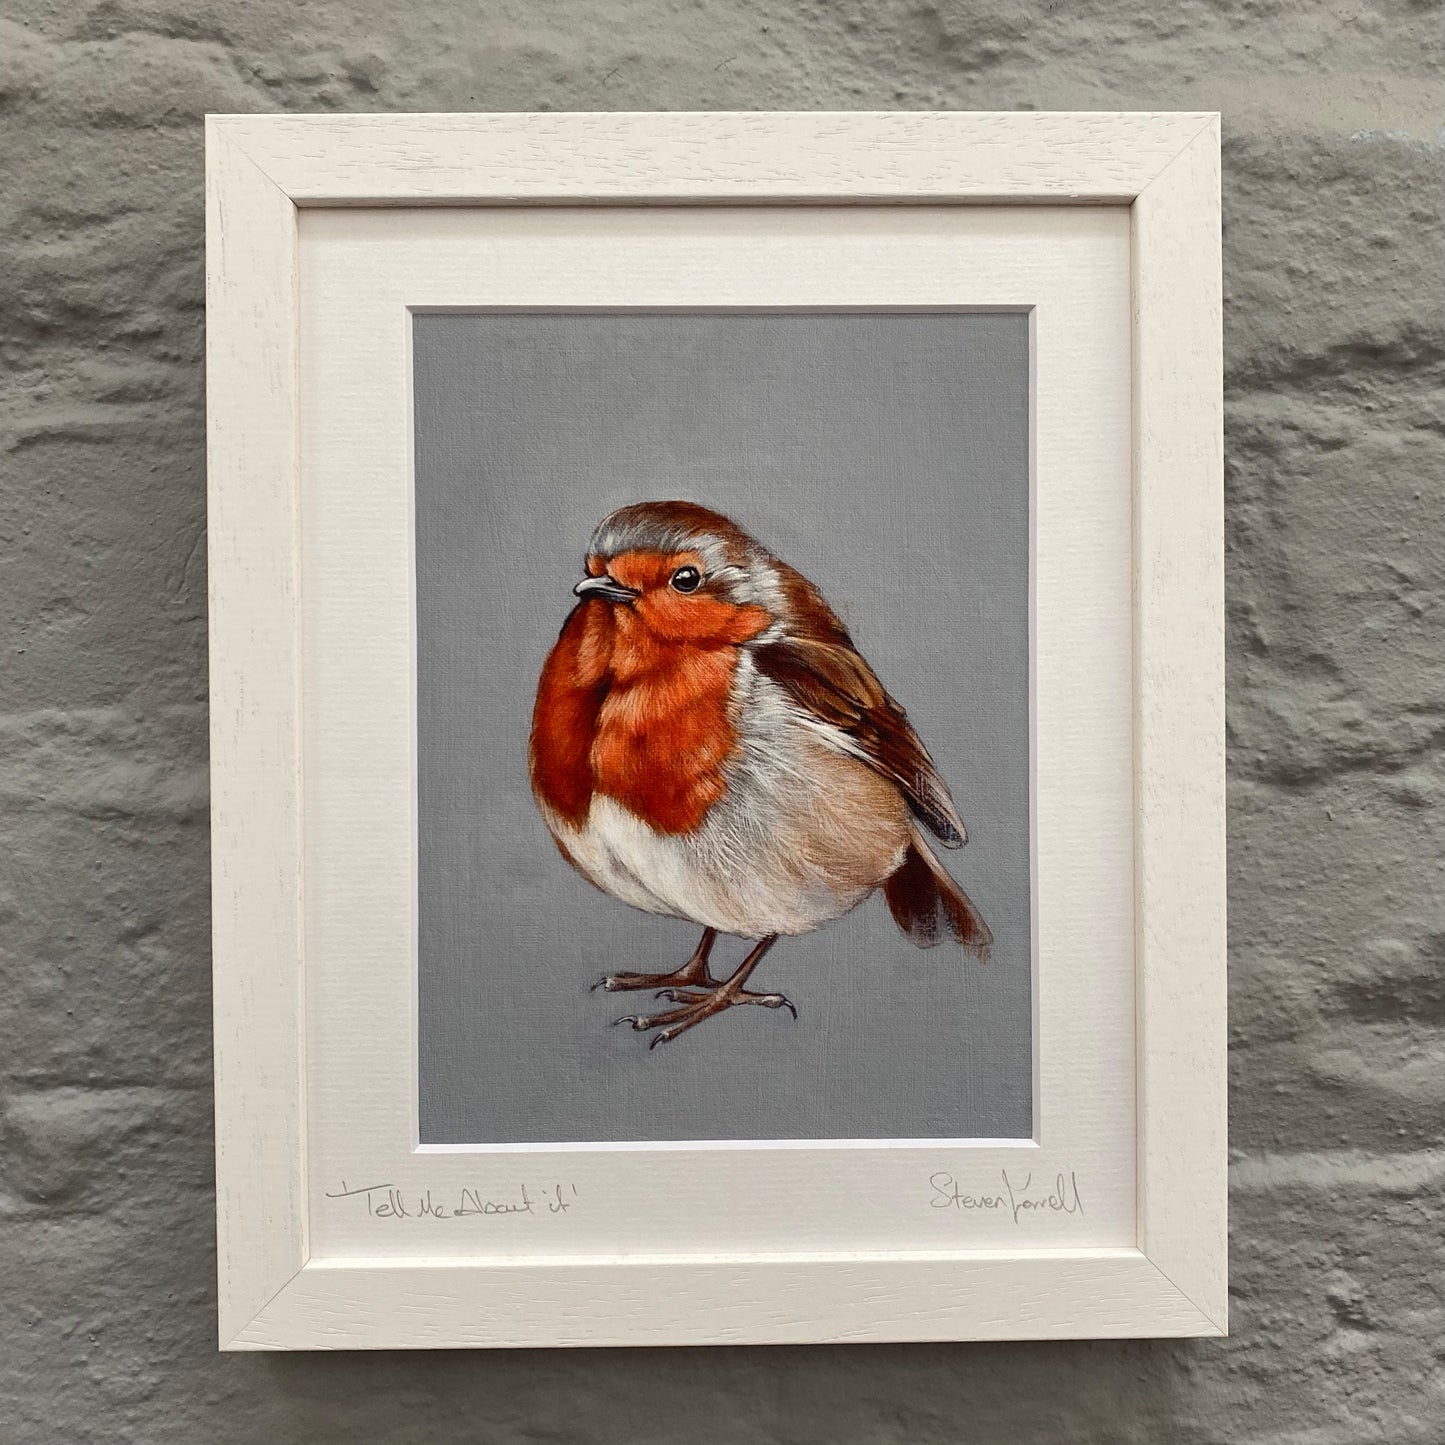 Tell Me About It - Fine Art Print - Robin Redbreast Gift